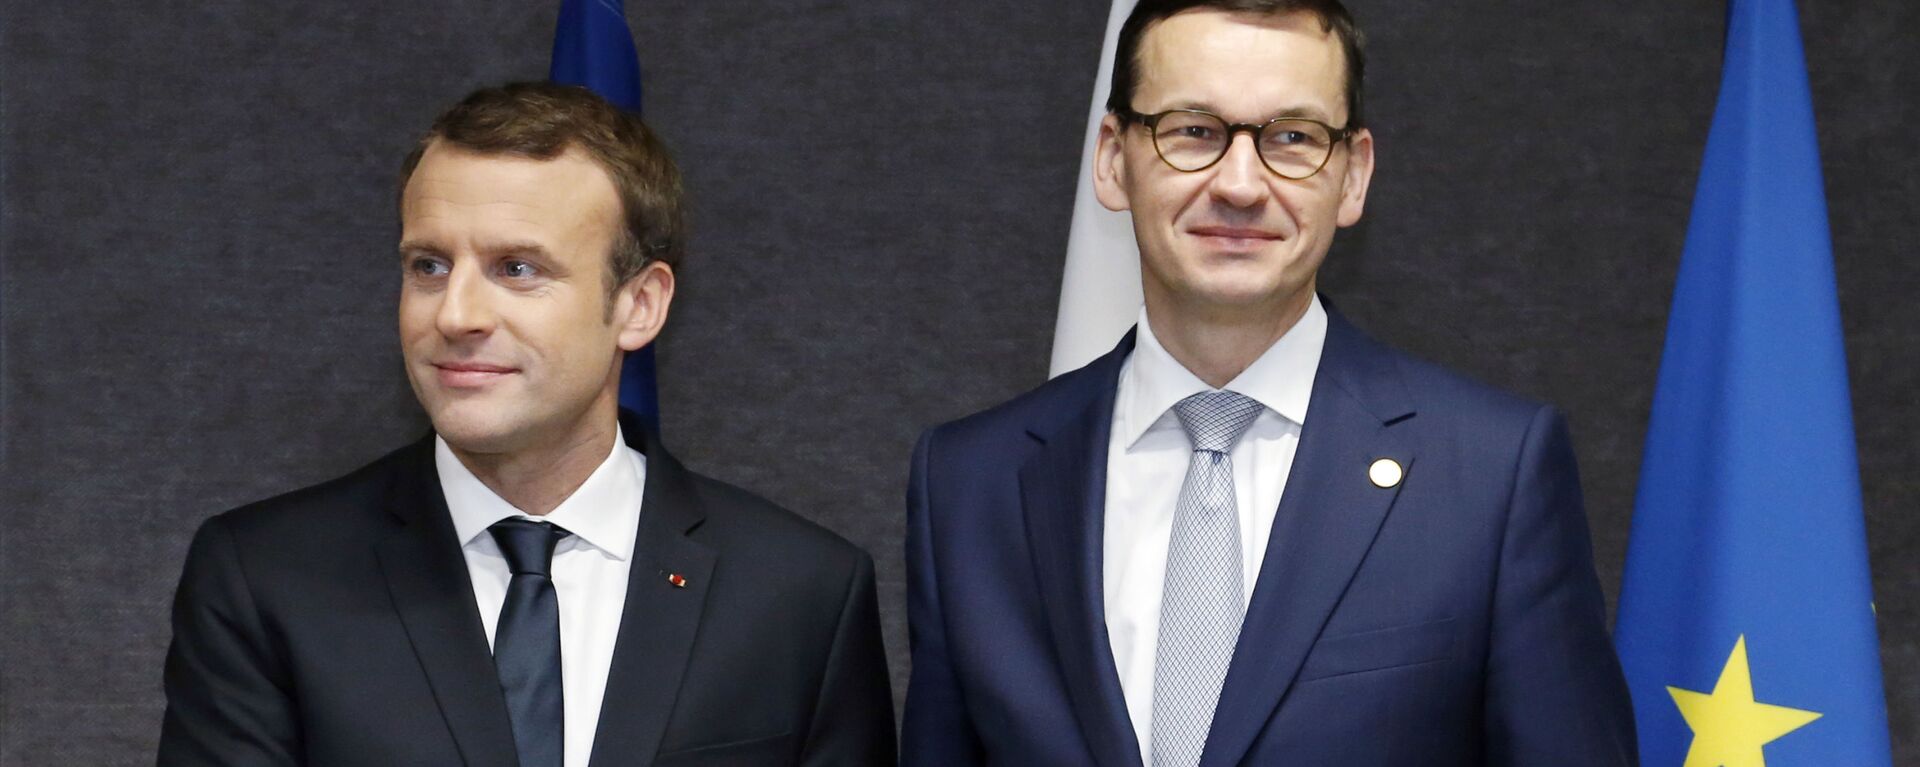 French President Emmanuel Macron, left, shakes hands with Polish Prime Minister Mateusz Morawiecki prior to a meeting on the sidelines of an EU summit in Brussels on Friday, Dec. 15, 2017.  - Sputnik International, 1920, 08.04.2022